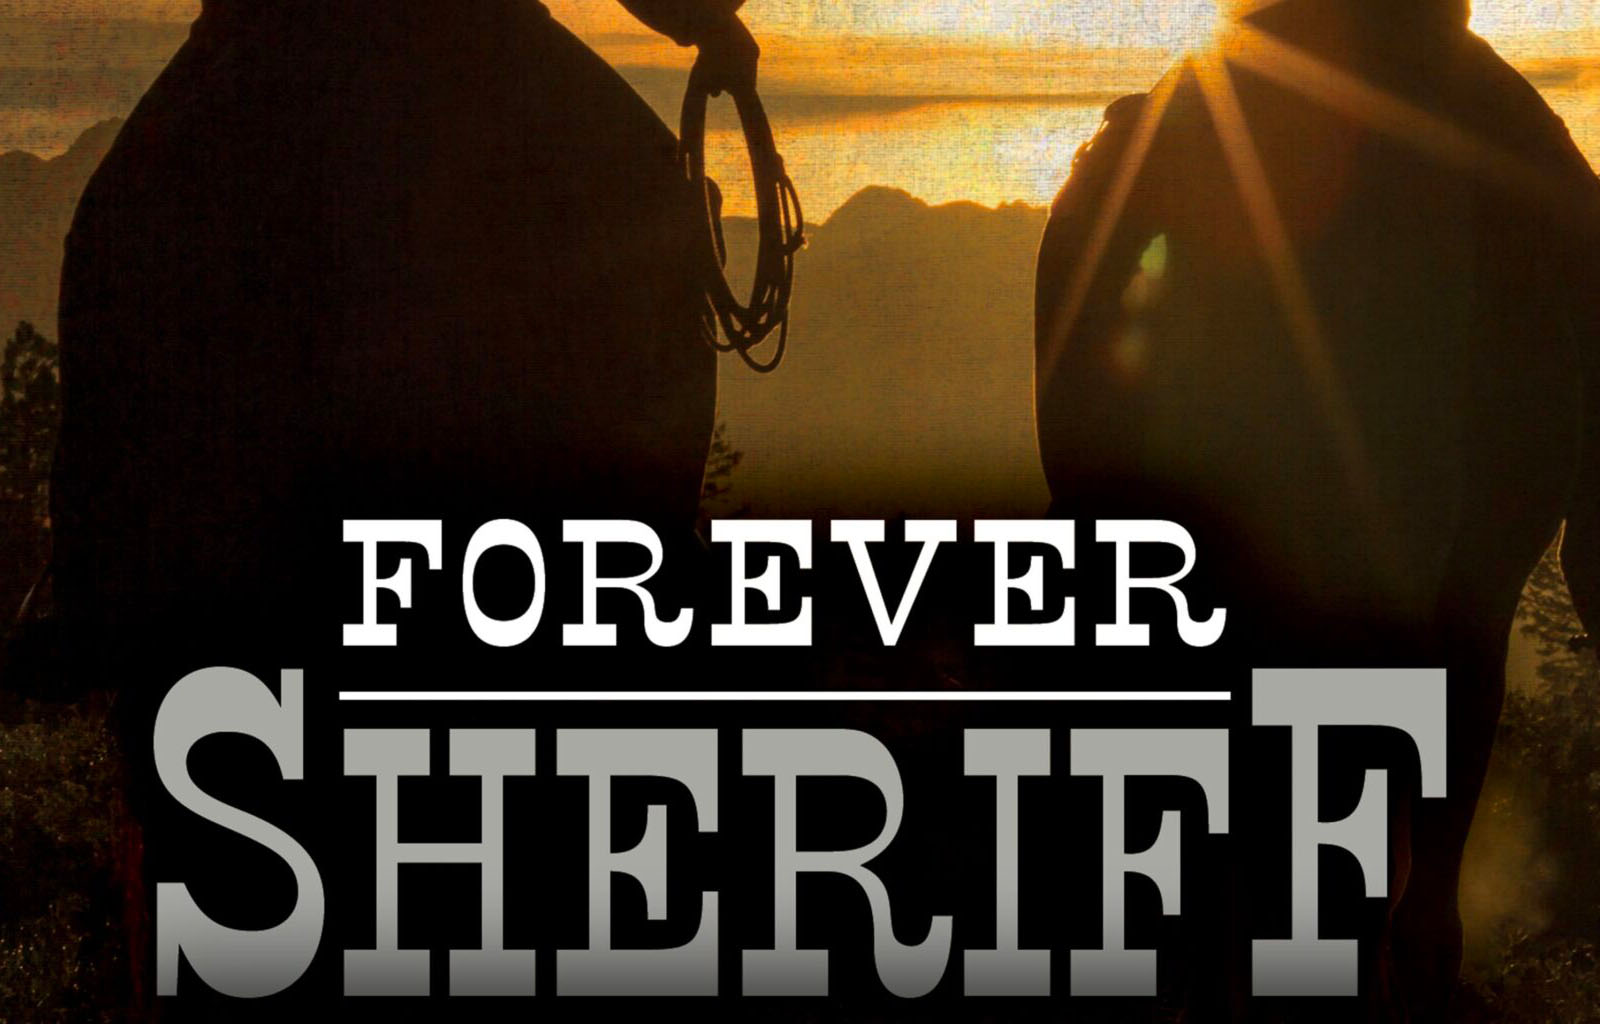 Part of the Forever Sheriff book cover showing title and two horses riding into sunset